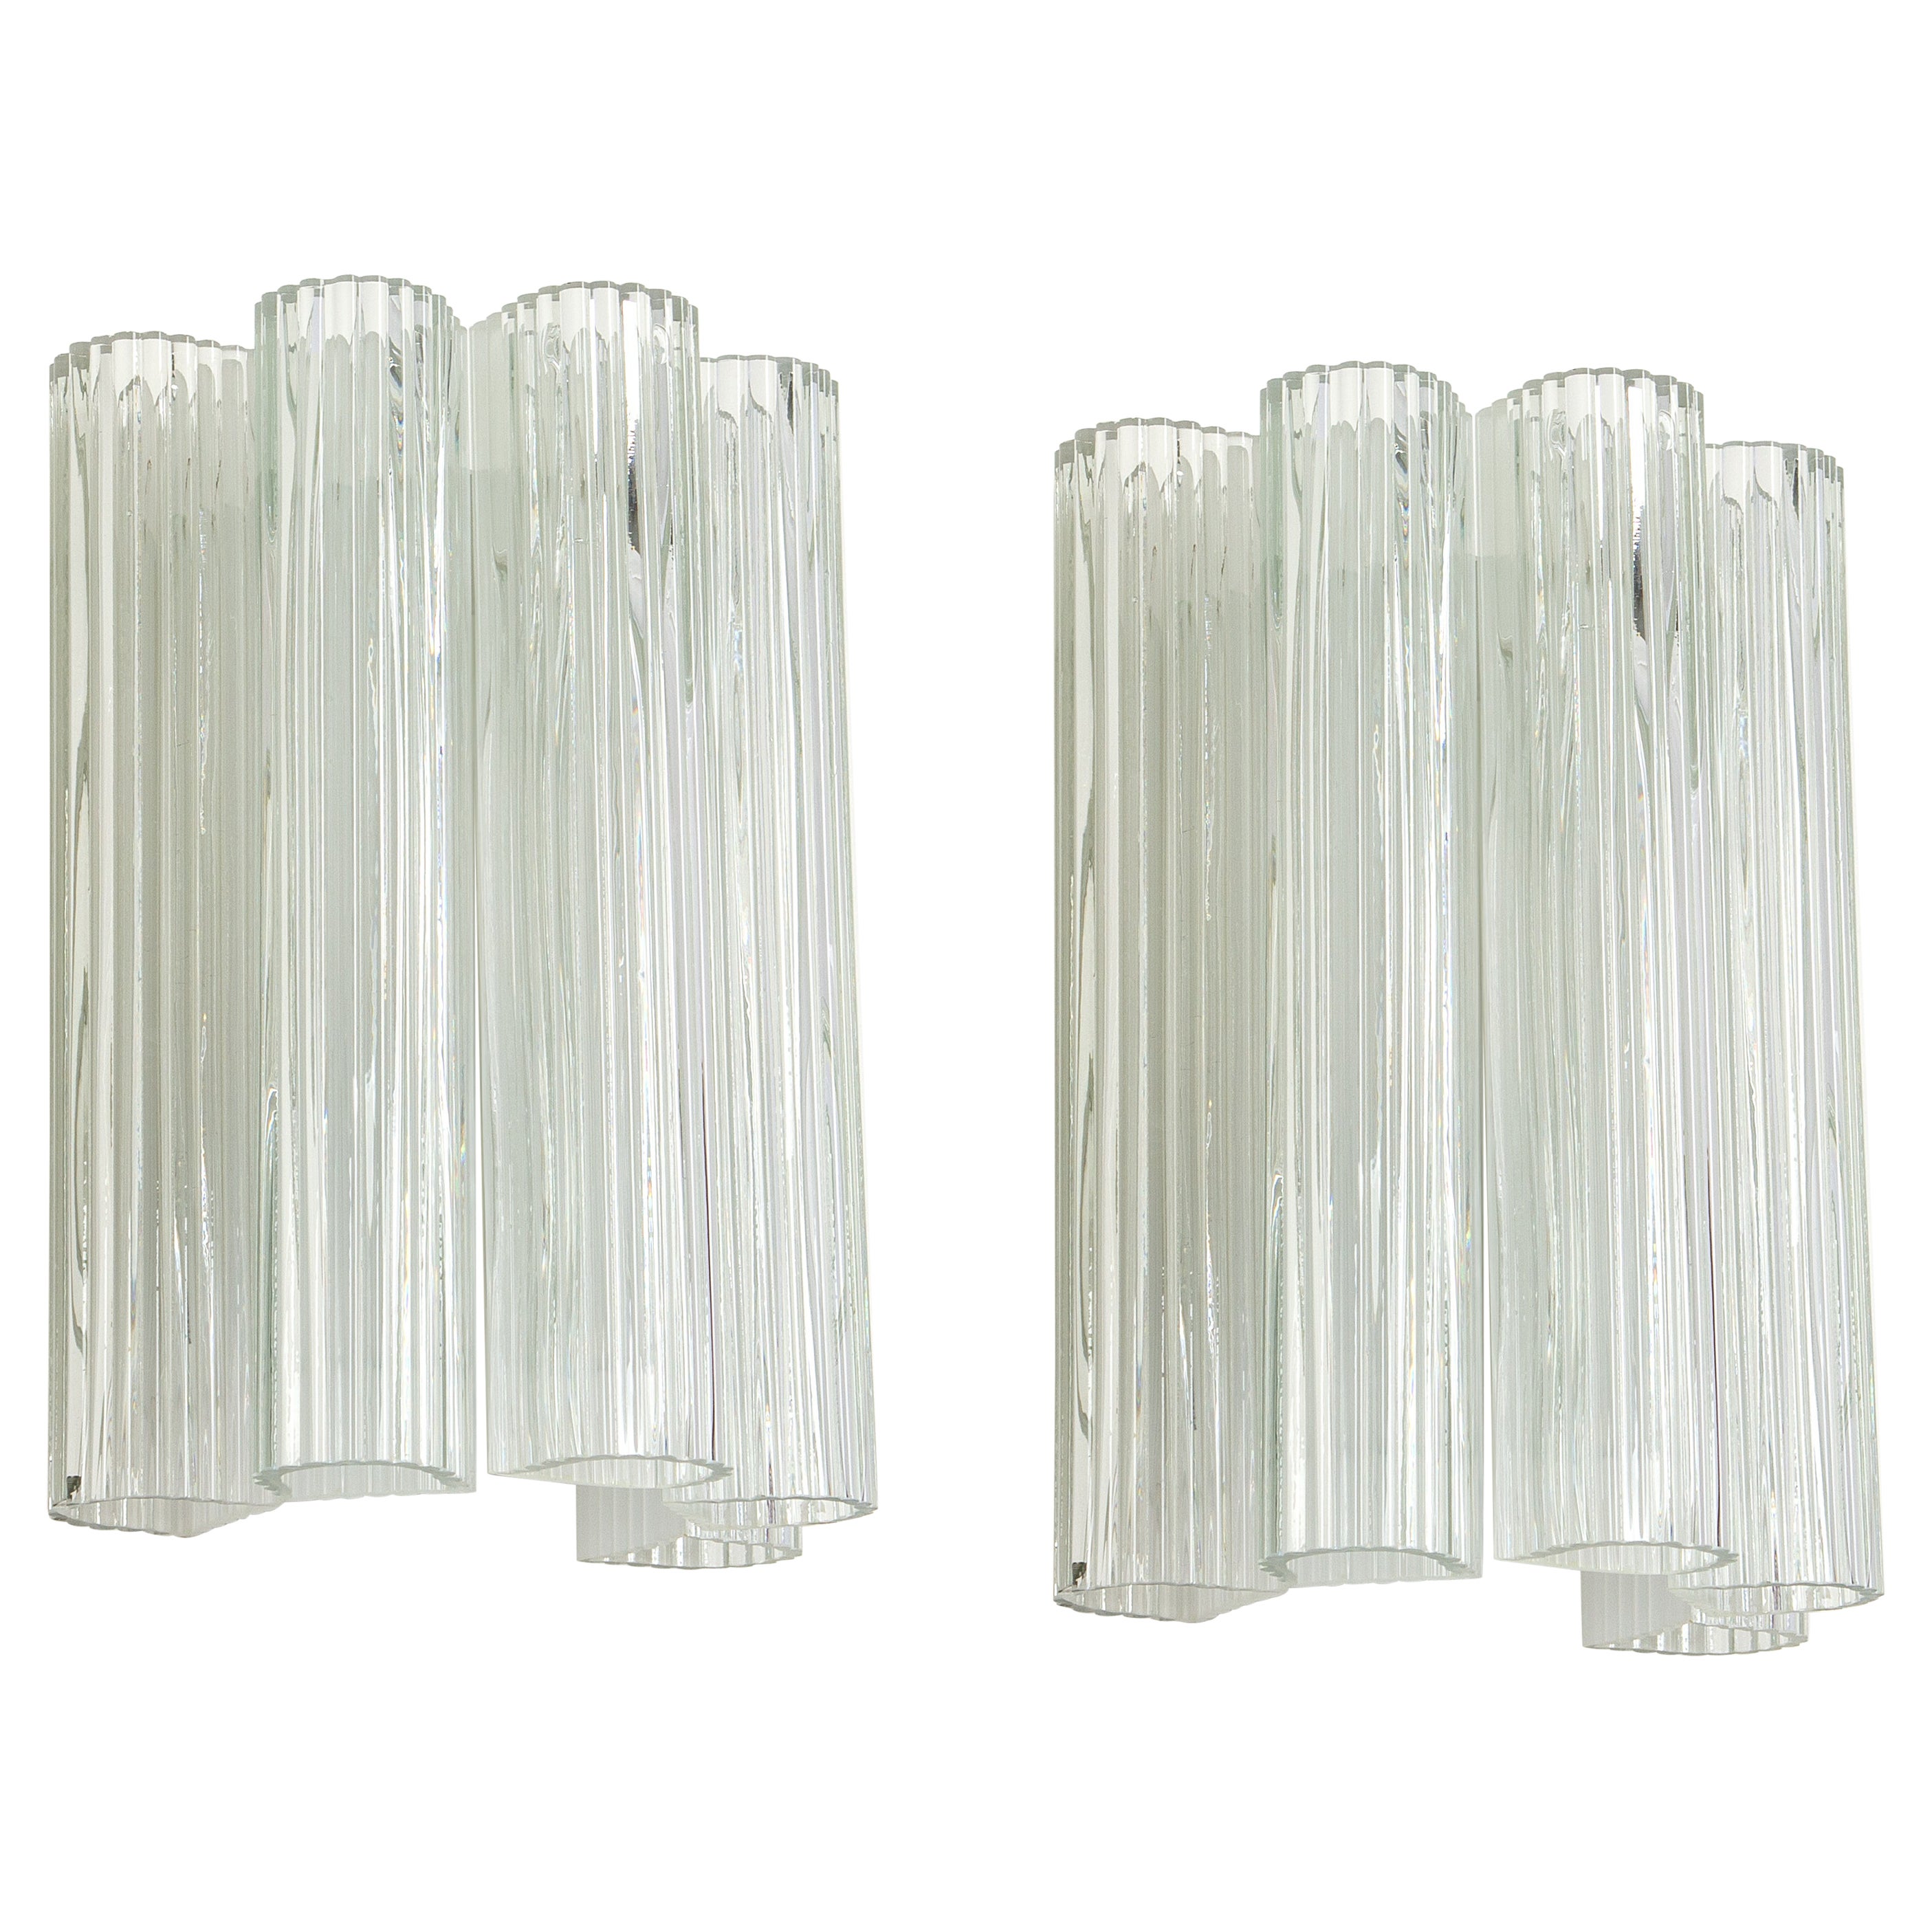 1 of 4 Large Murano Glass Wall Sconces by Doria, Germany, 1960s For Sale